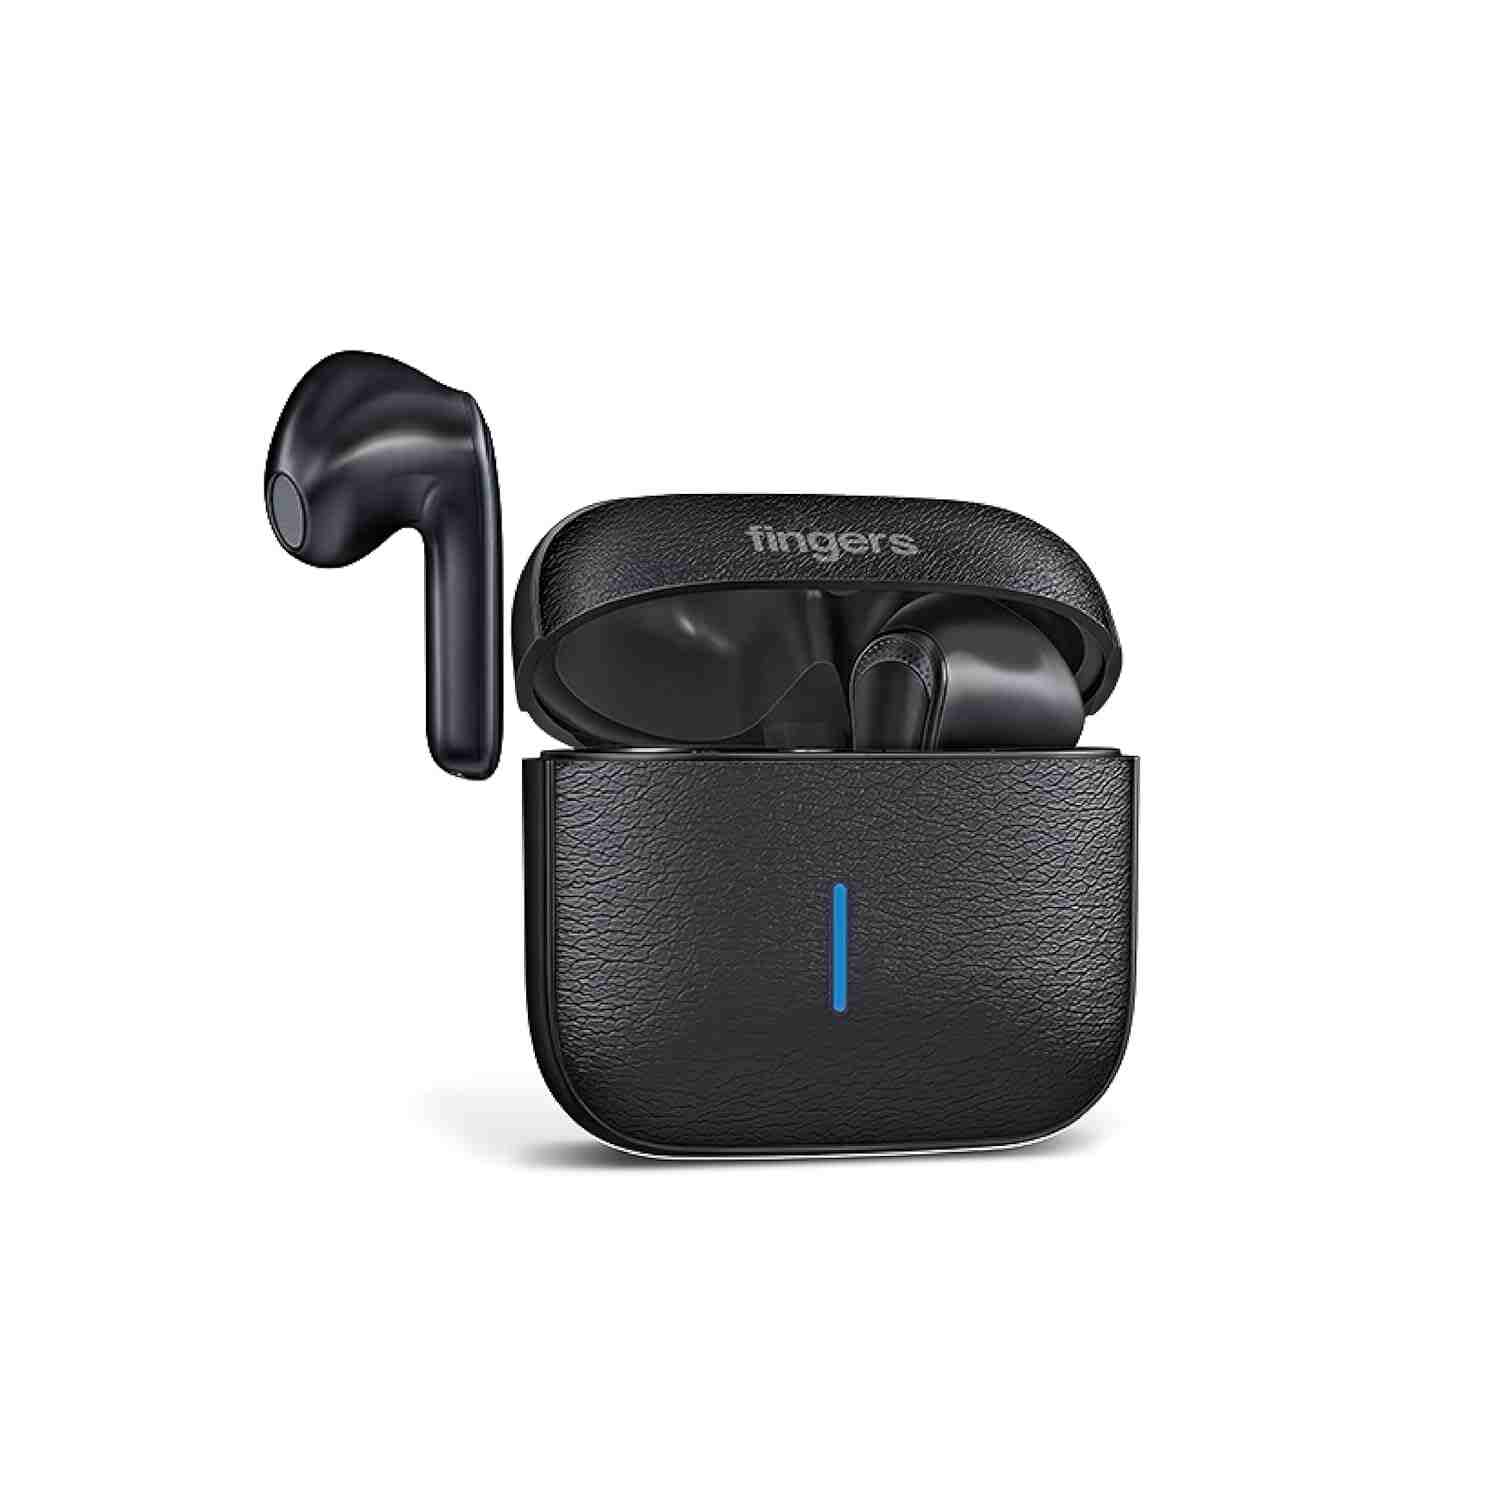 FINGERS Go-Posh Truly Wireless in Ear Earbuds [25 Hours Total Playback, Built-in Mic with SNC™ (Surround Noise Cancellation) Technology, Voice Assistant, Touch Controls] (Luxe Black)